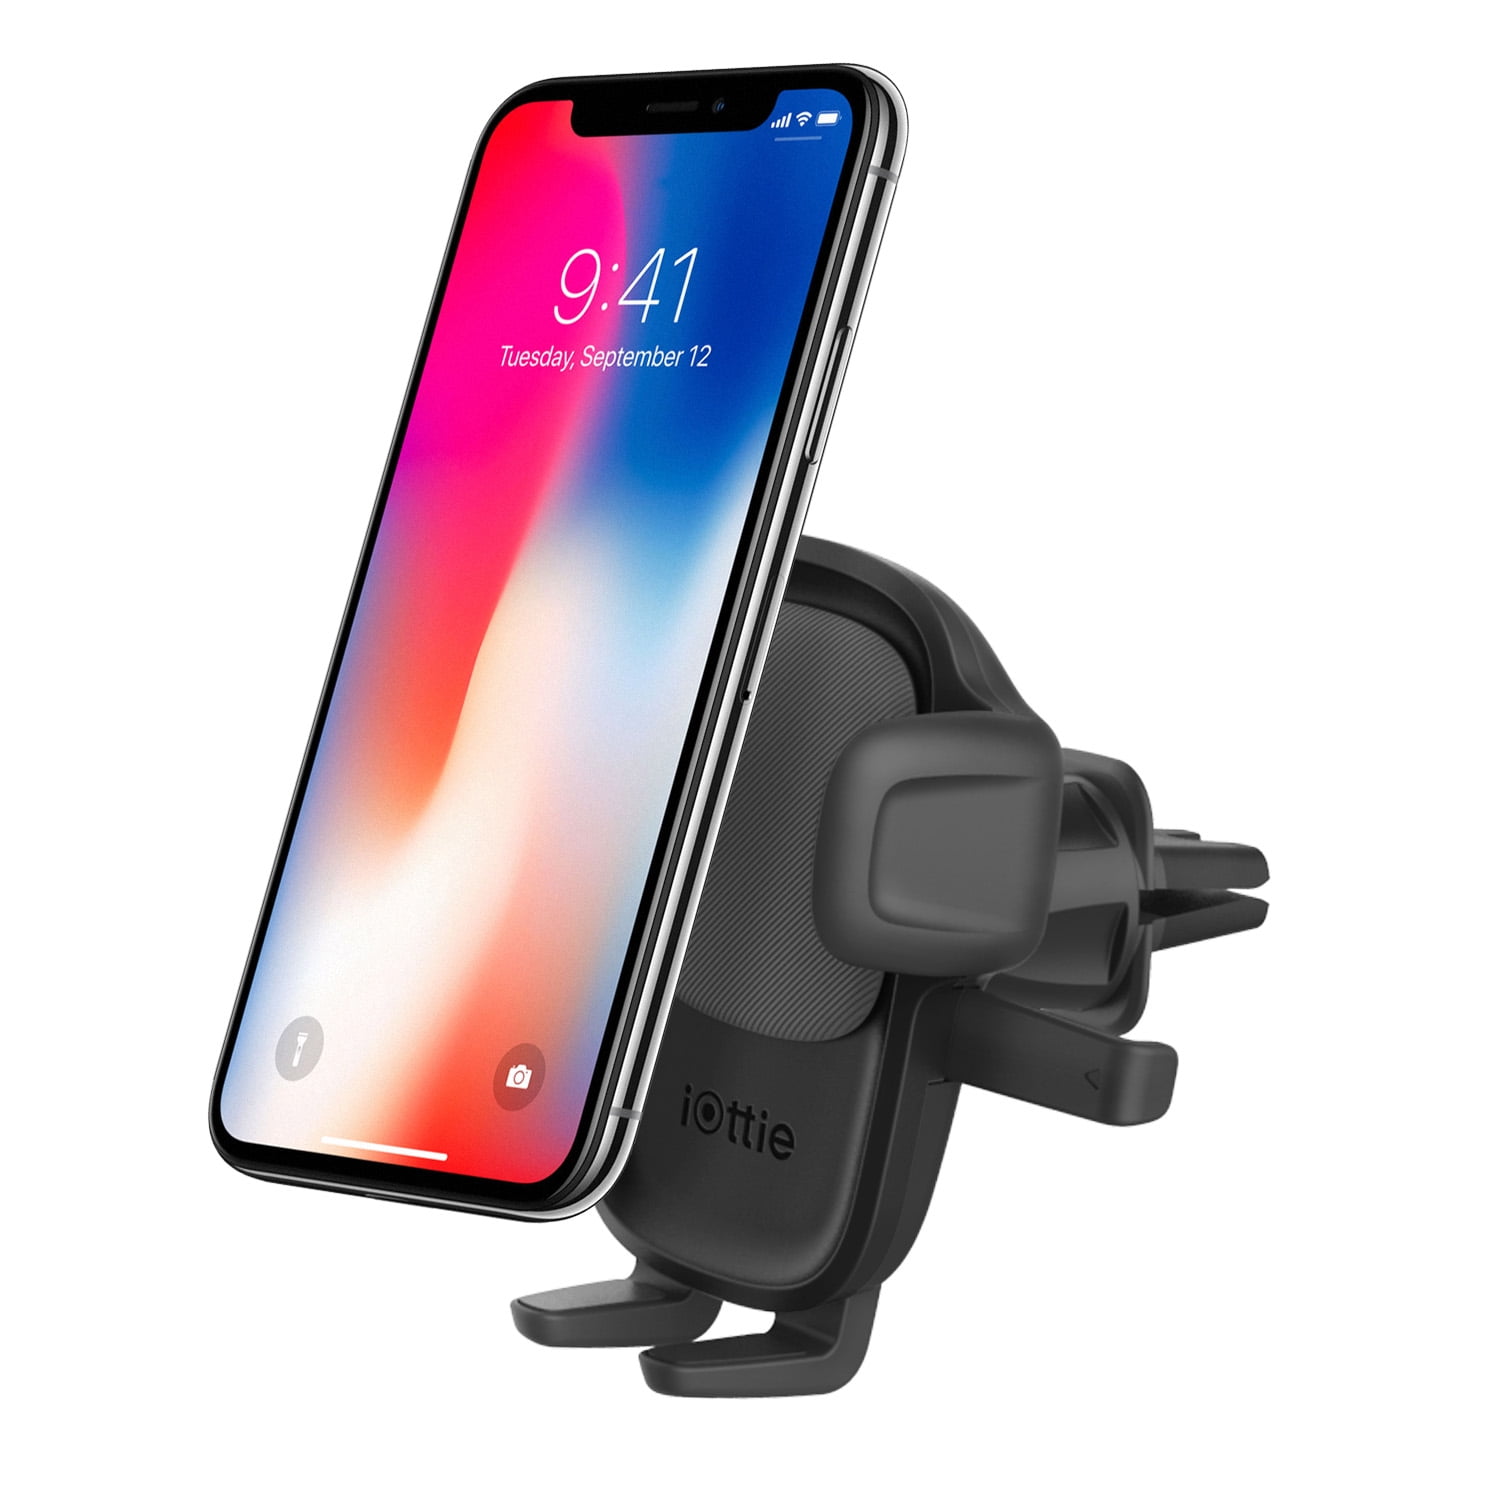 ANDOLO Universal Car Phone Holder Mount Air Vent 360° Adjustable with 2 Upgrade Air Vent Clips Hands Free Cell Phone Holder for Car Compatible with All 4-7 Smartphones Black 